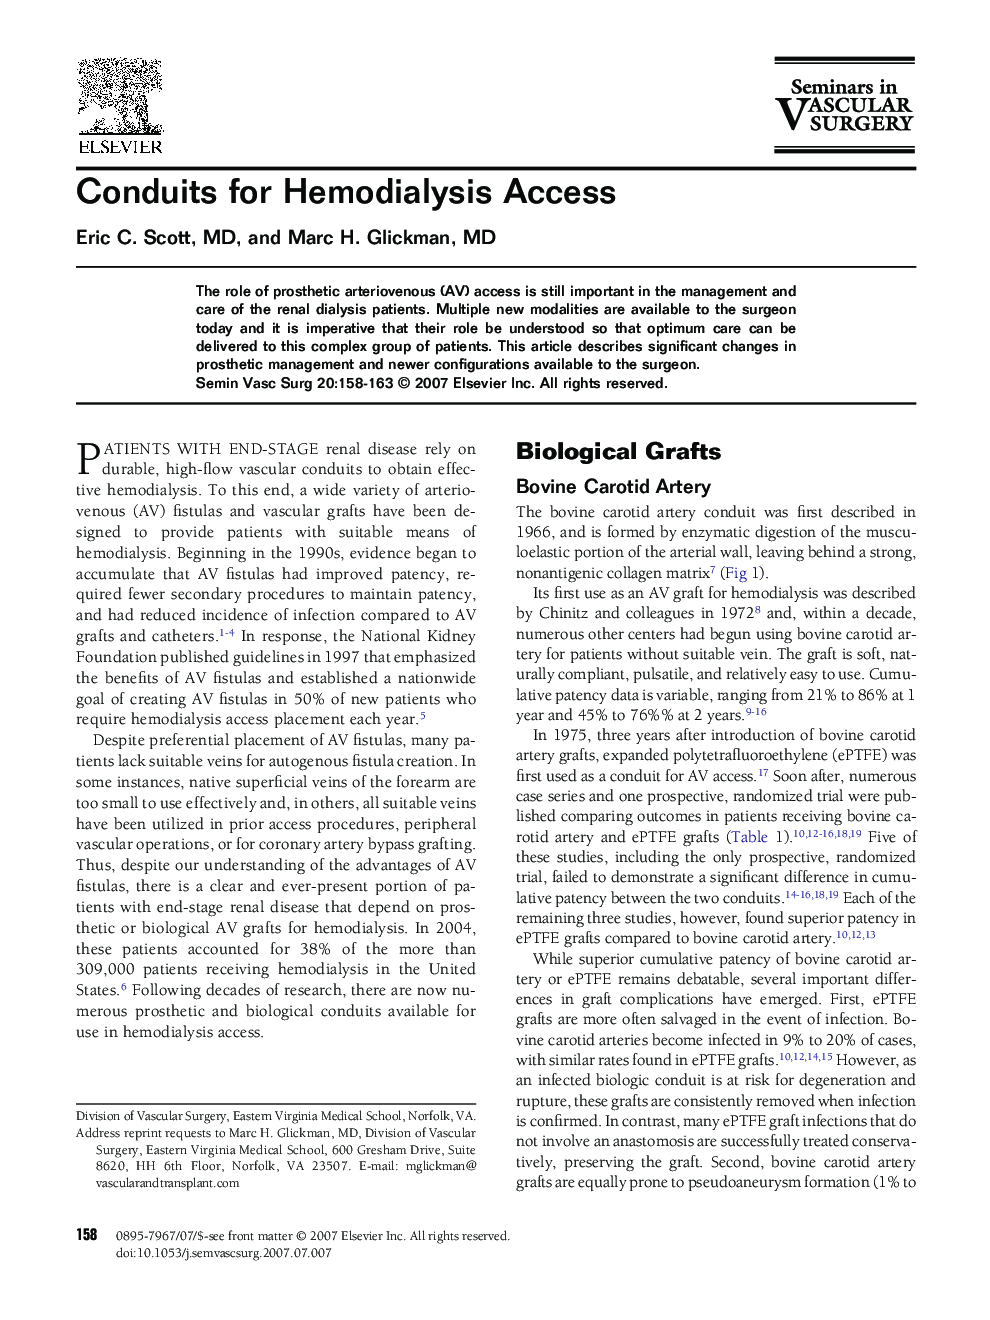 Conduits for Hemodialysis Access